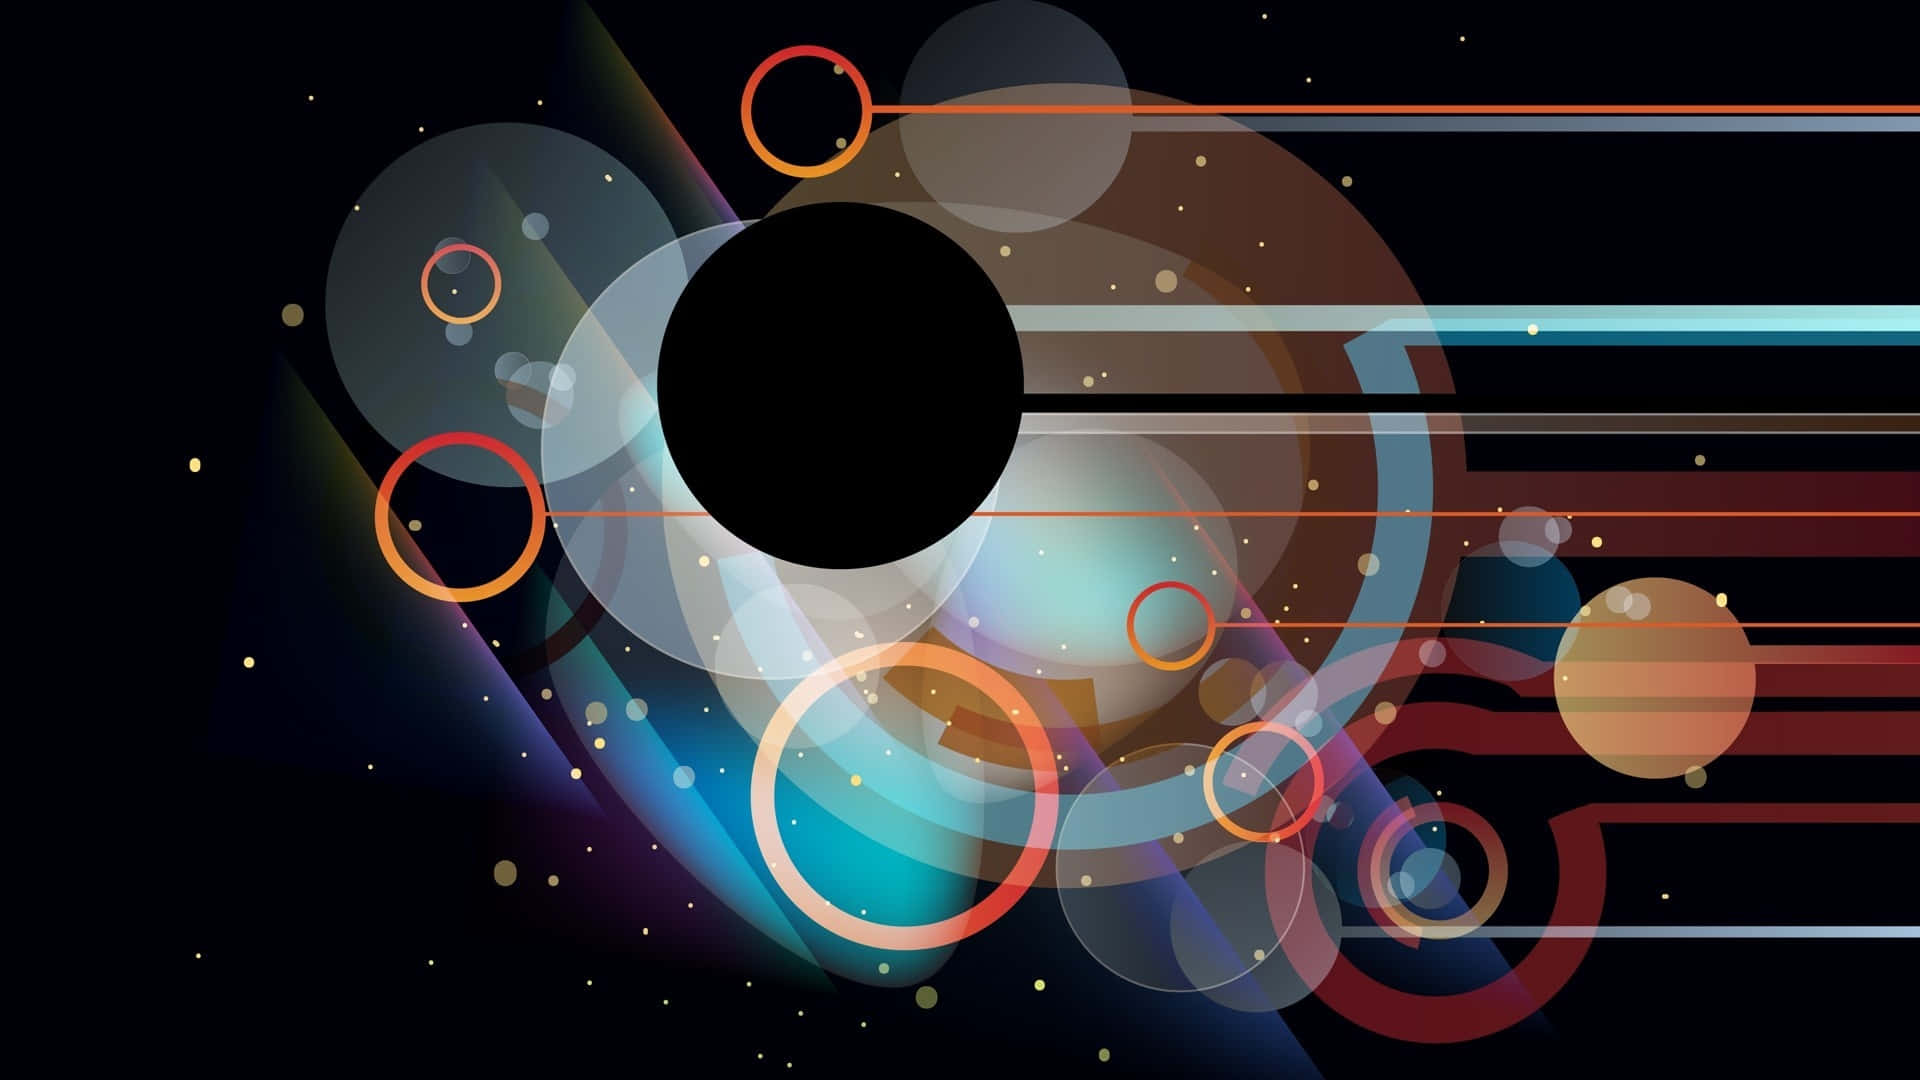 A Space Background With Circles And Circles